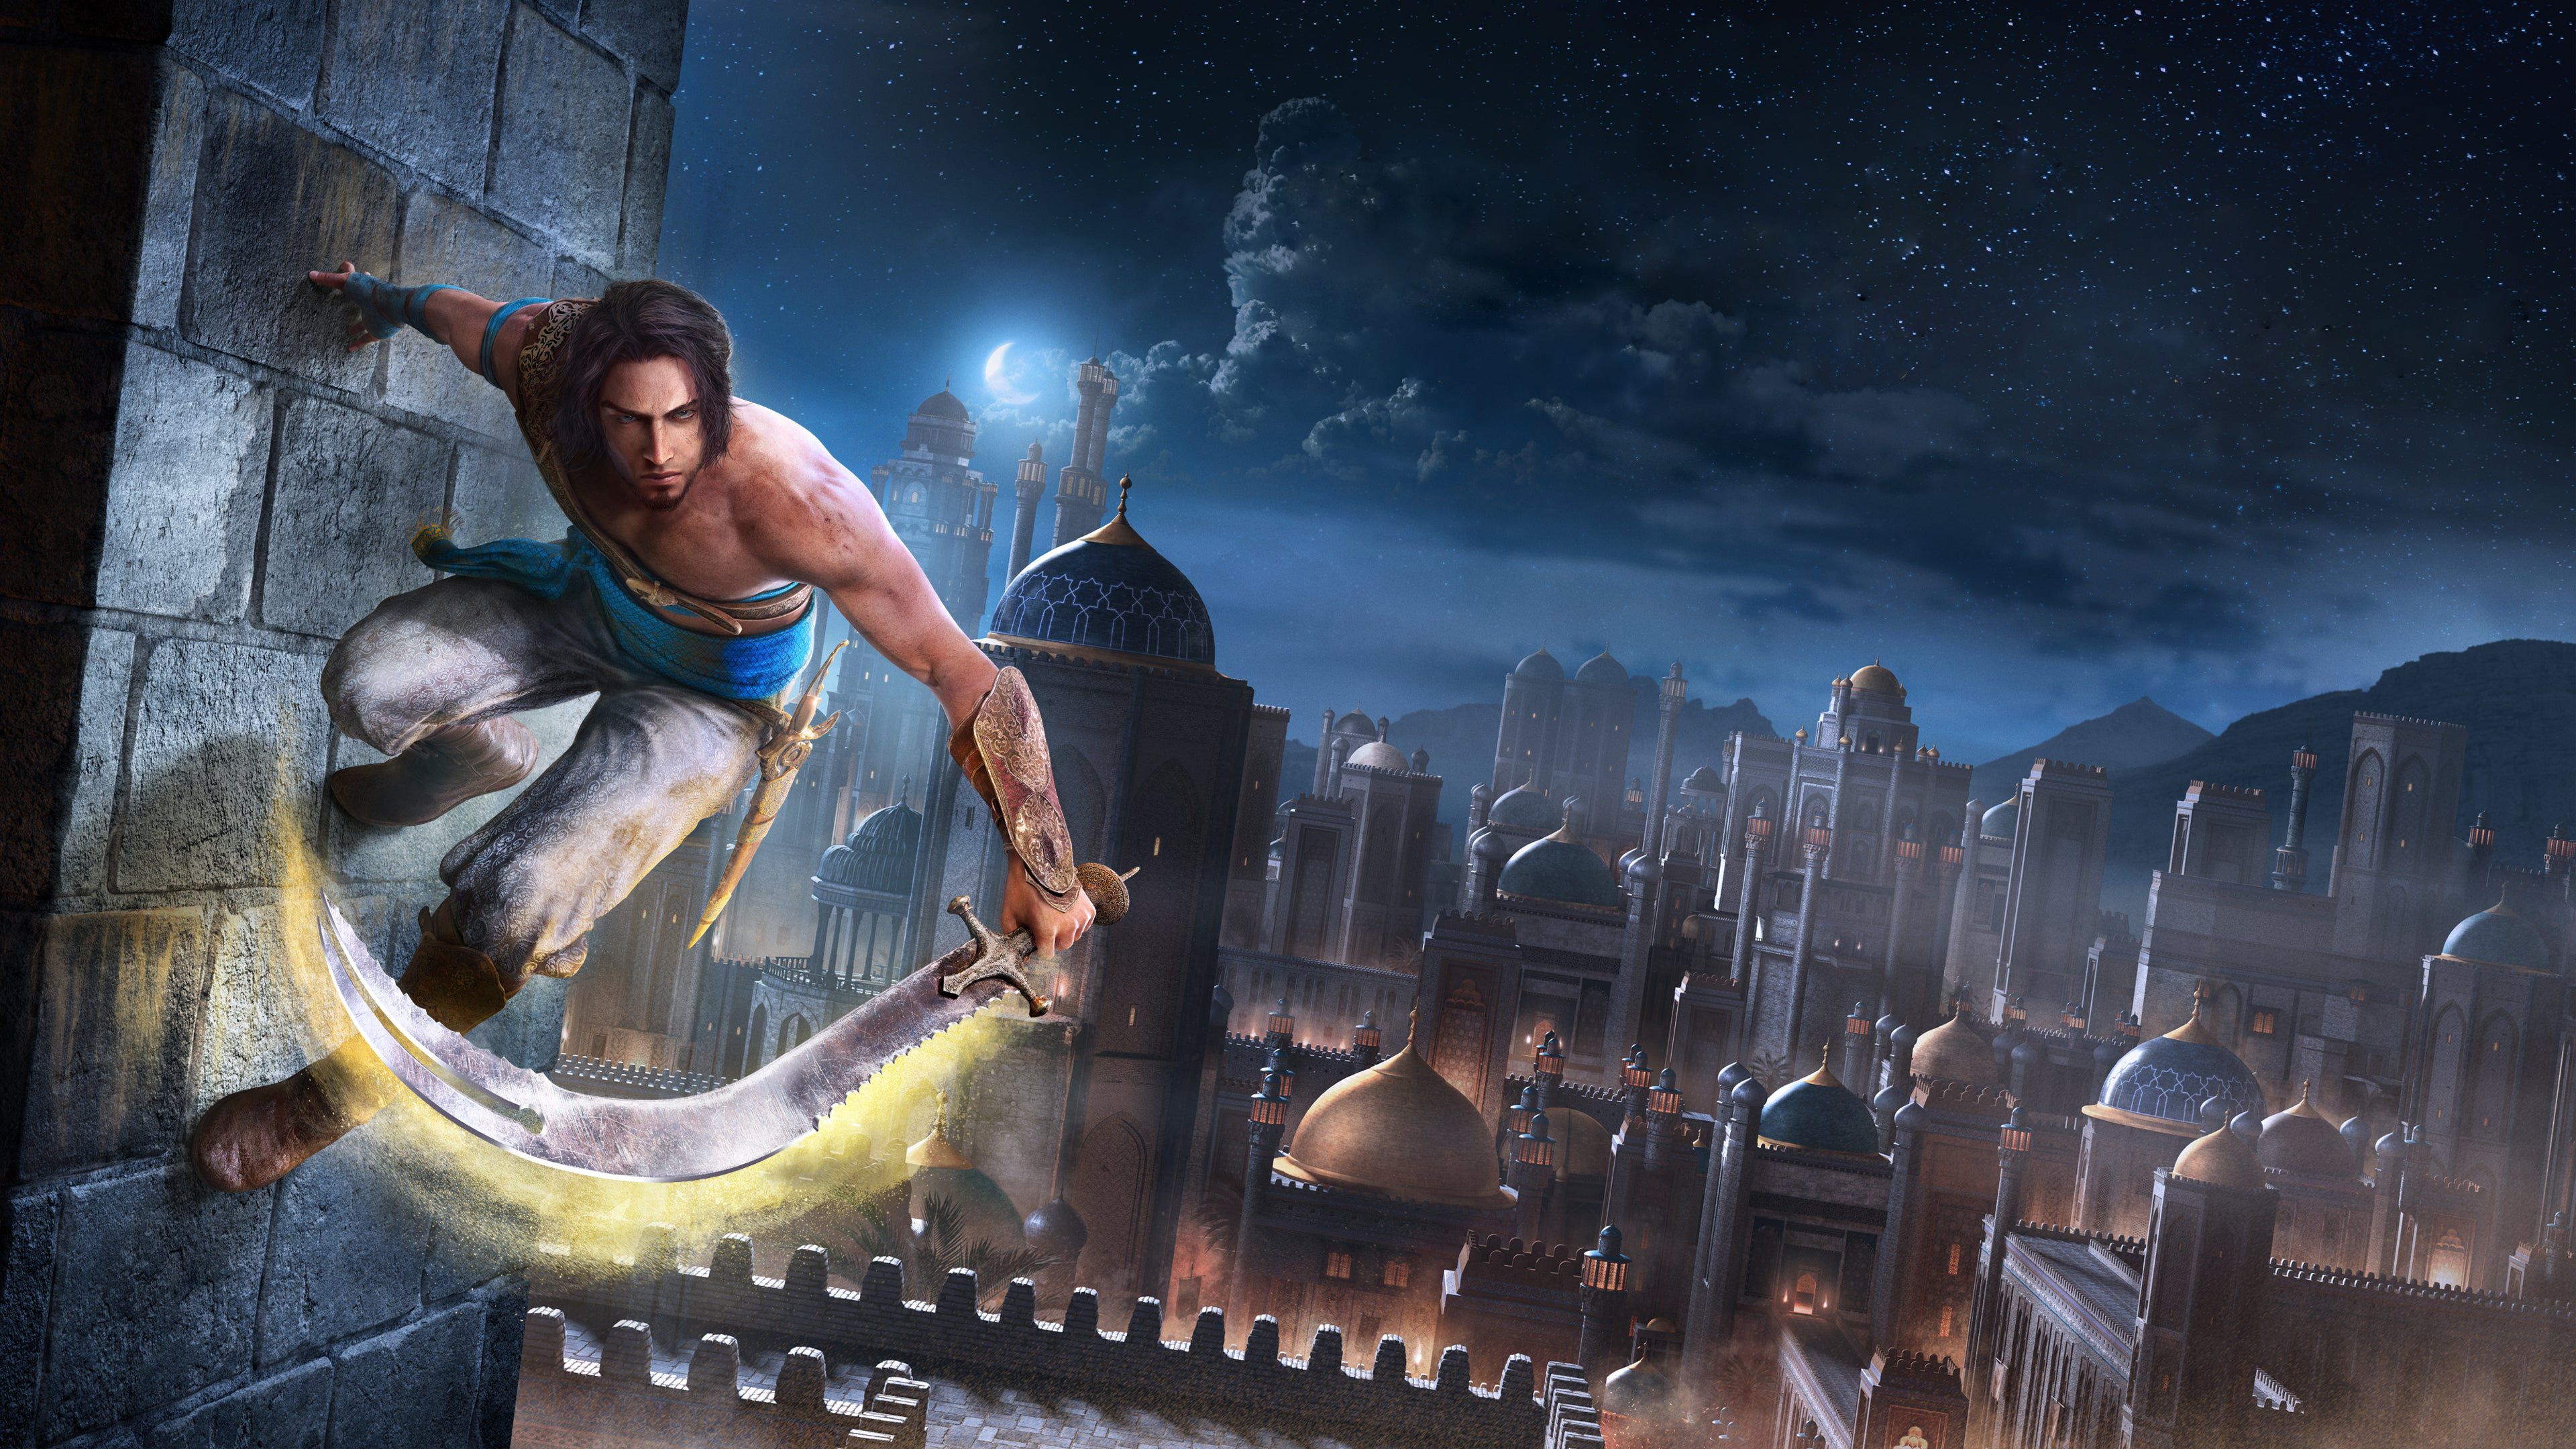 Prince of Persia Sands of Time Remake 1440P Resolution Wallpaper, HD Games 4K Wallpaper, Image, Photo and Background